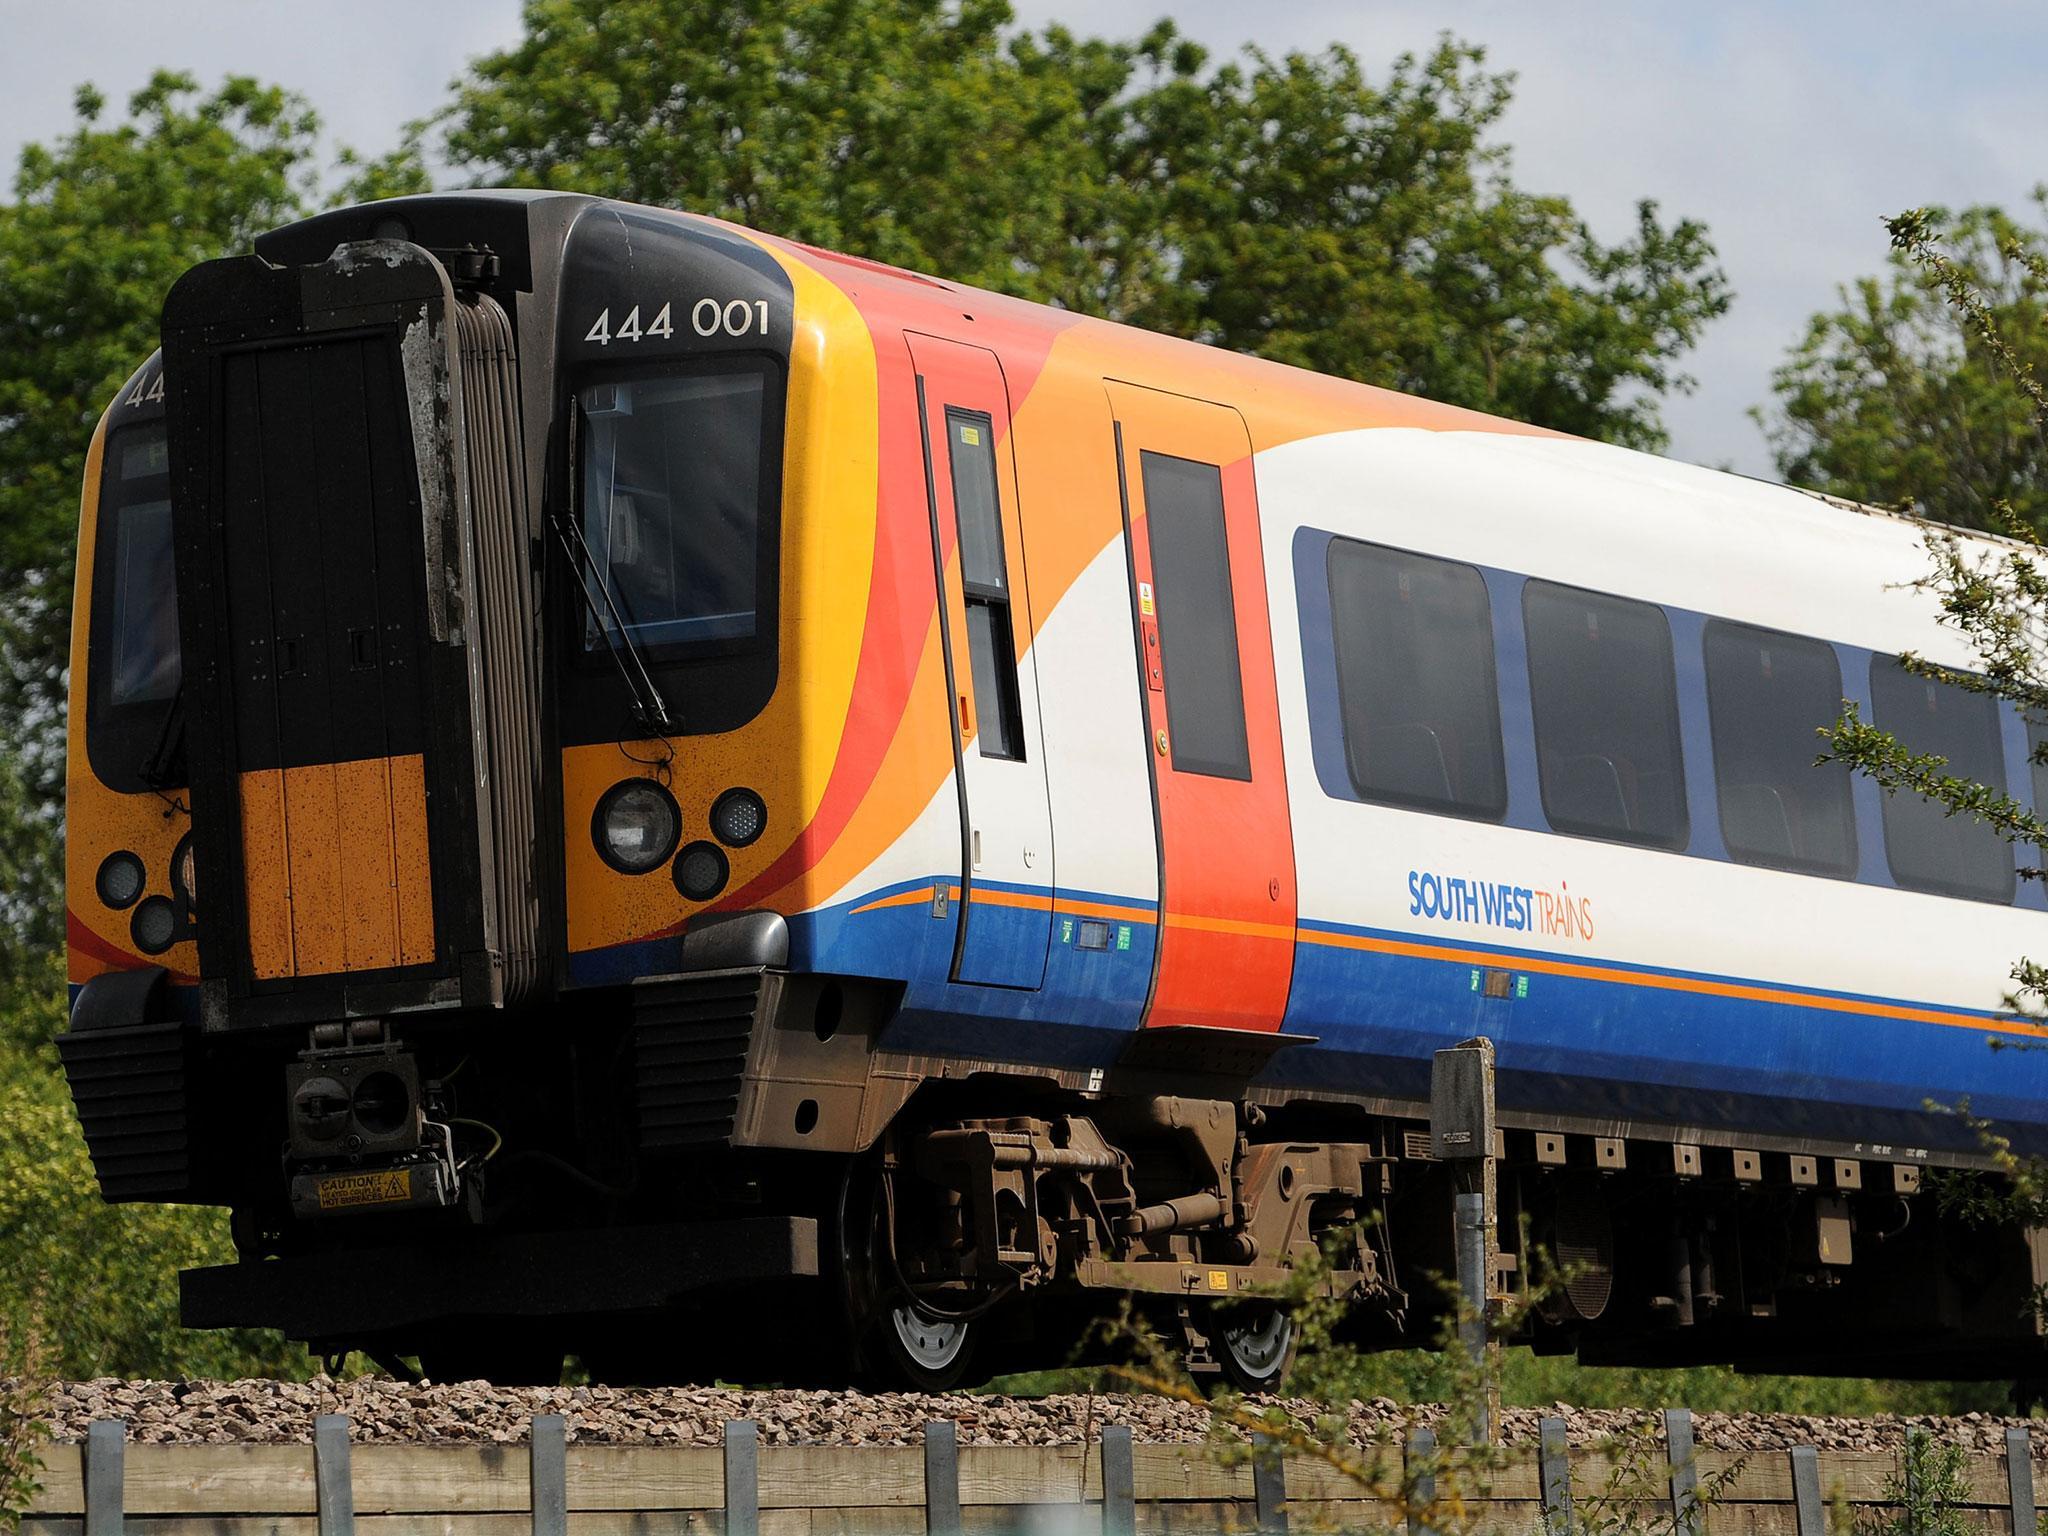 The South Western Railways train partially derailed at low speed as it came out of Wimbledon station